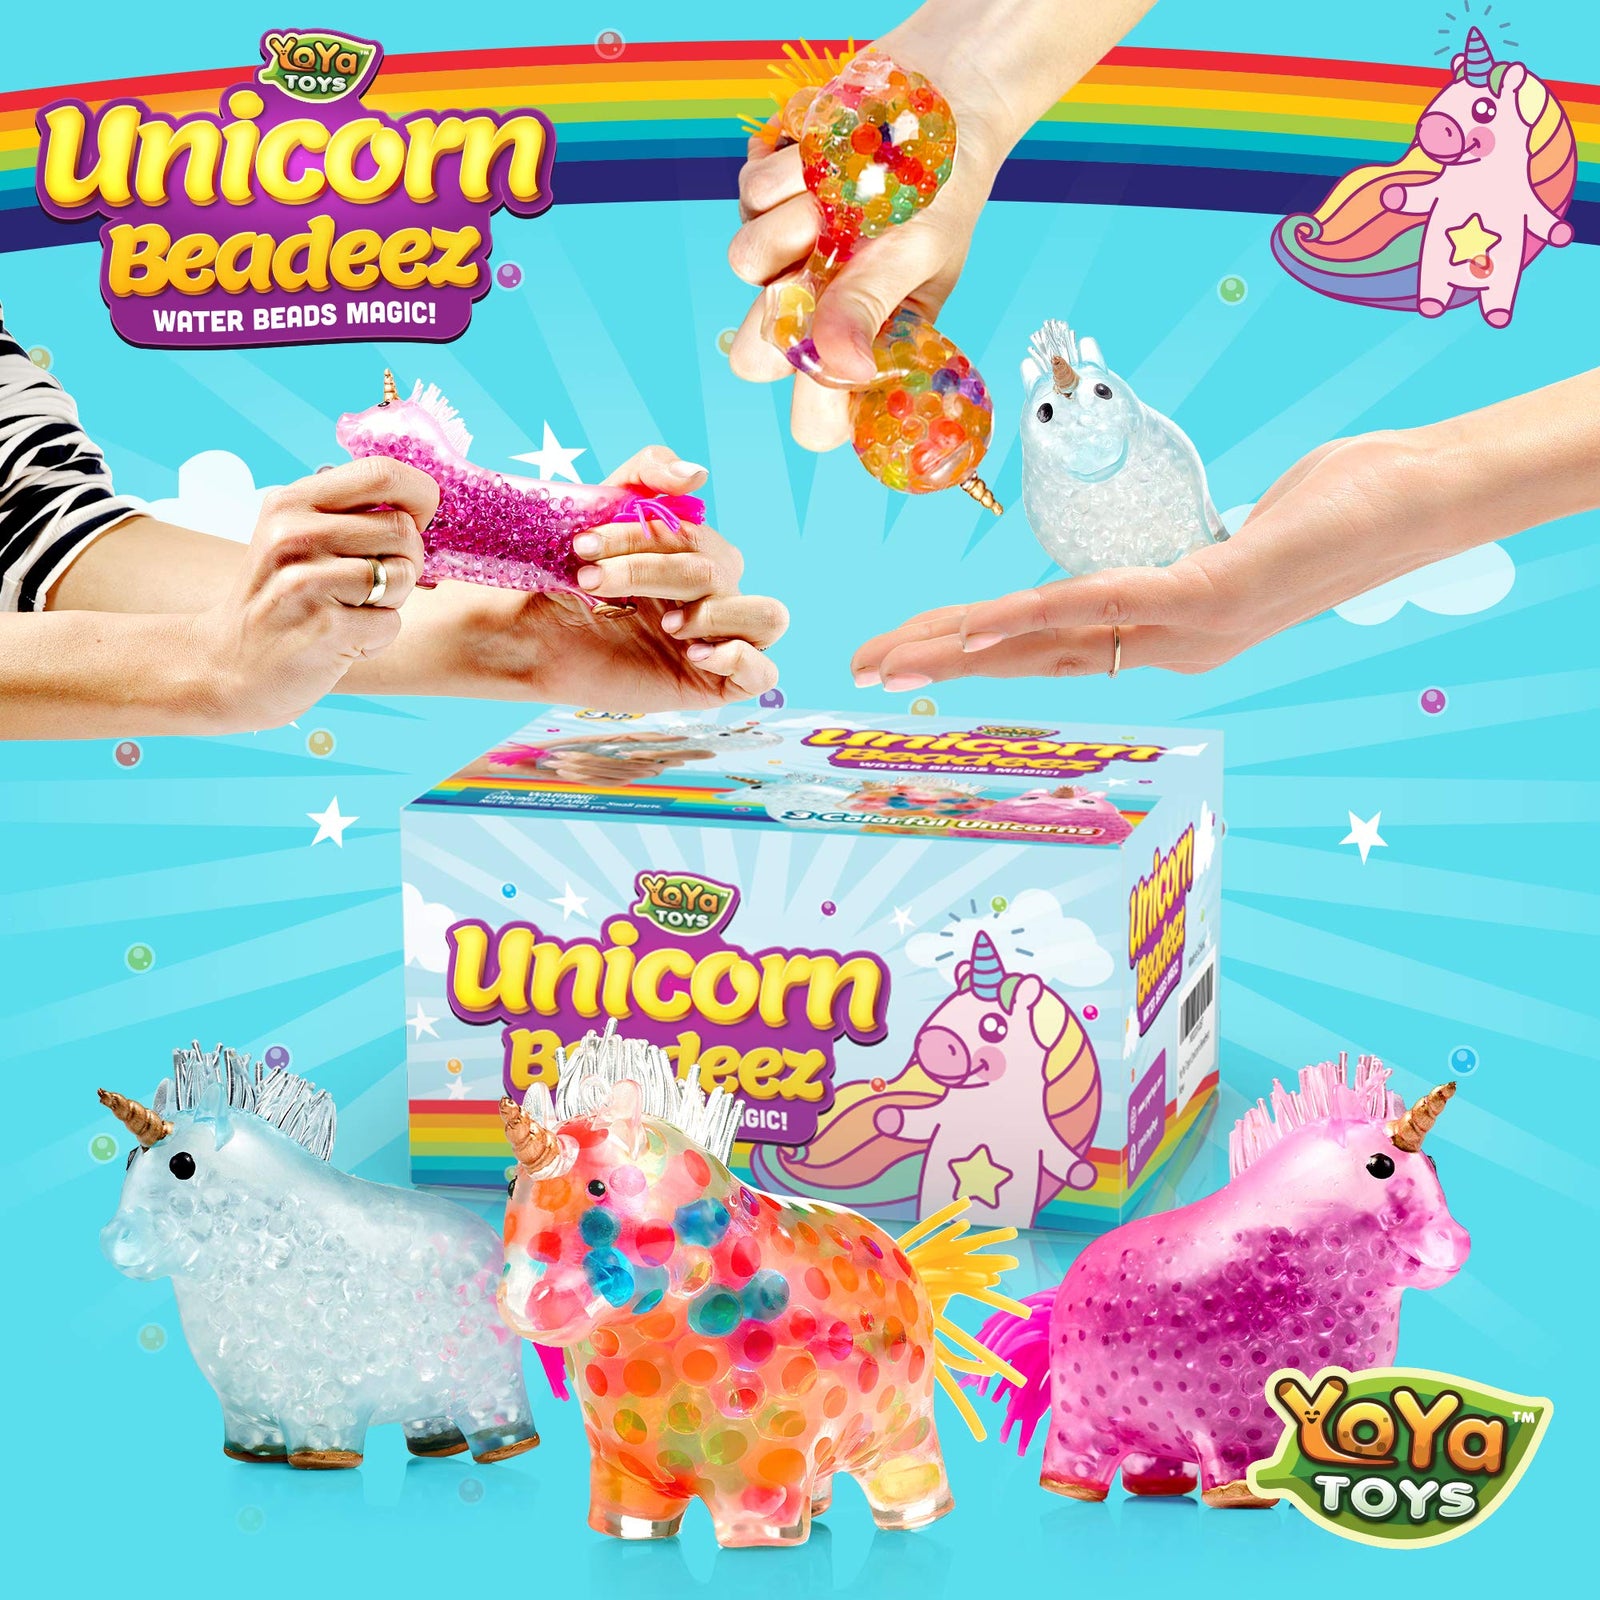 YoYa Toys Beadeez Unicorn Squishy Stress Balls Toy (3-Pack) for Girls, Boys, or Adults - Colorful, Gel Water Beads Balls Inside - Promote Anxiety and Stress Relief - Promote Calm Focus and Play